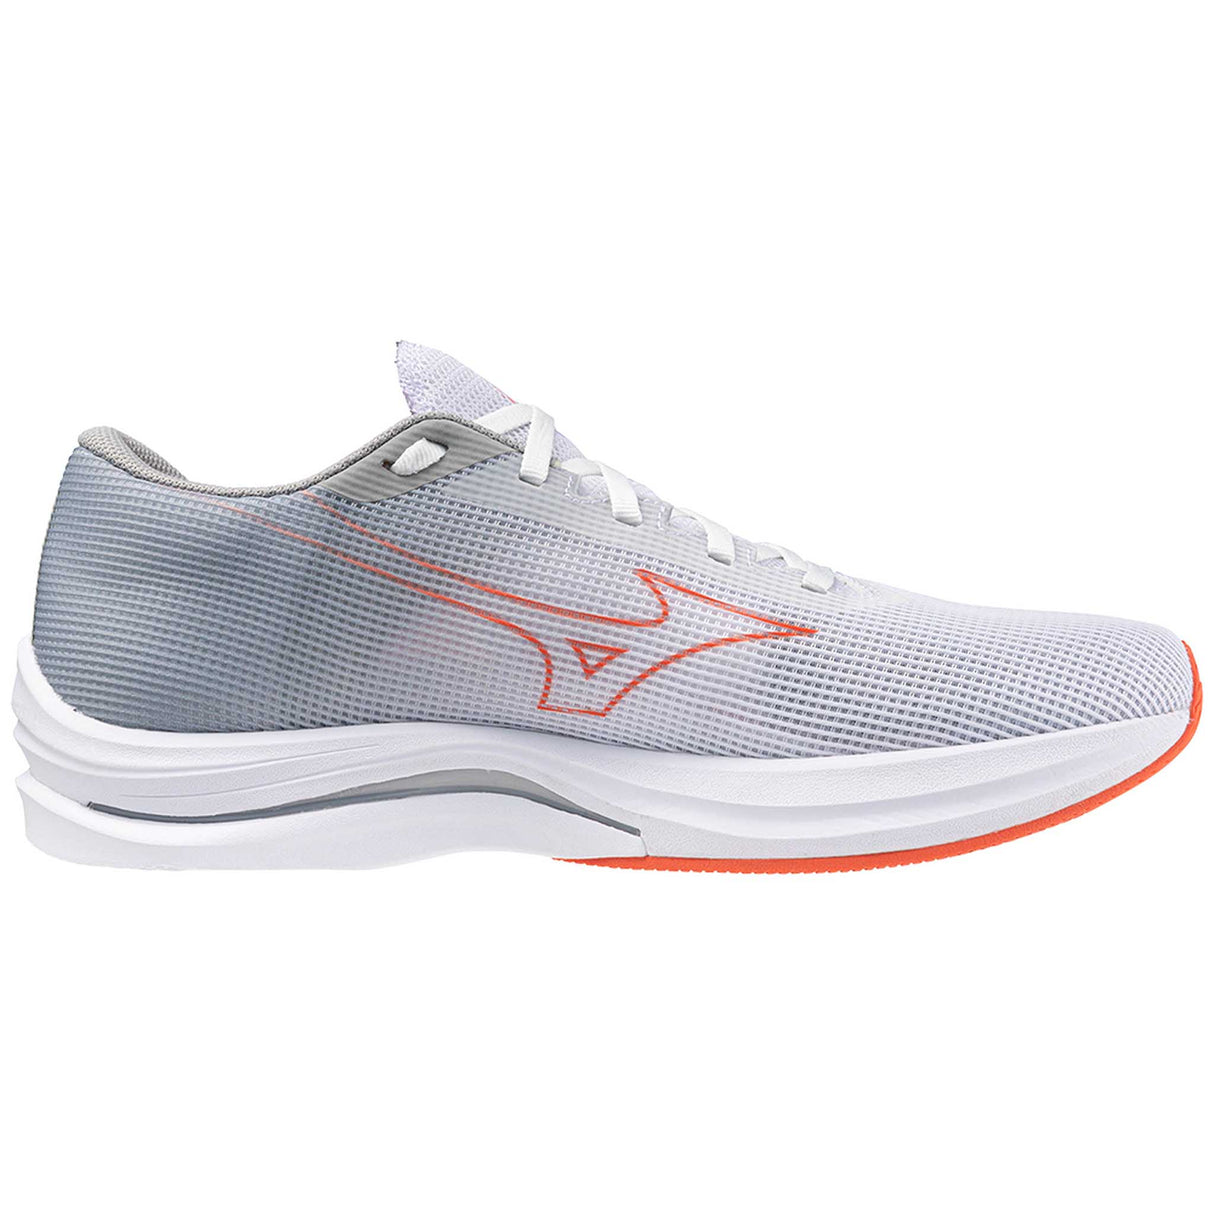 Mizuno Wave Rebellion Sonic 2 souliers de course homme lateral - White / Hot Coral